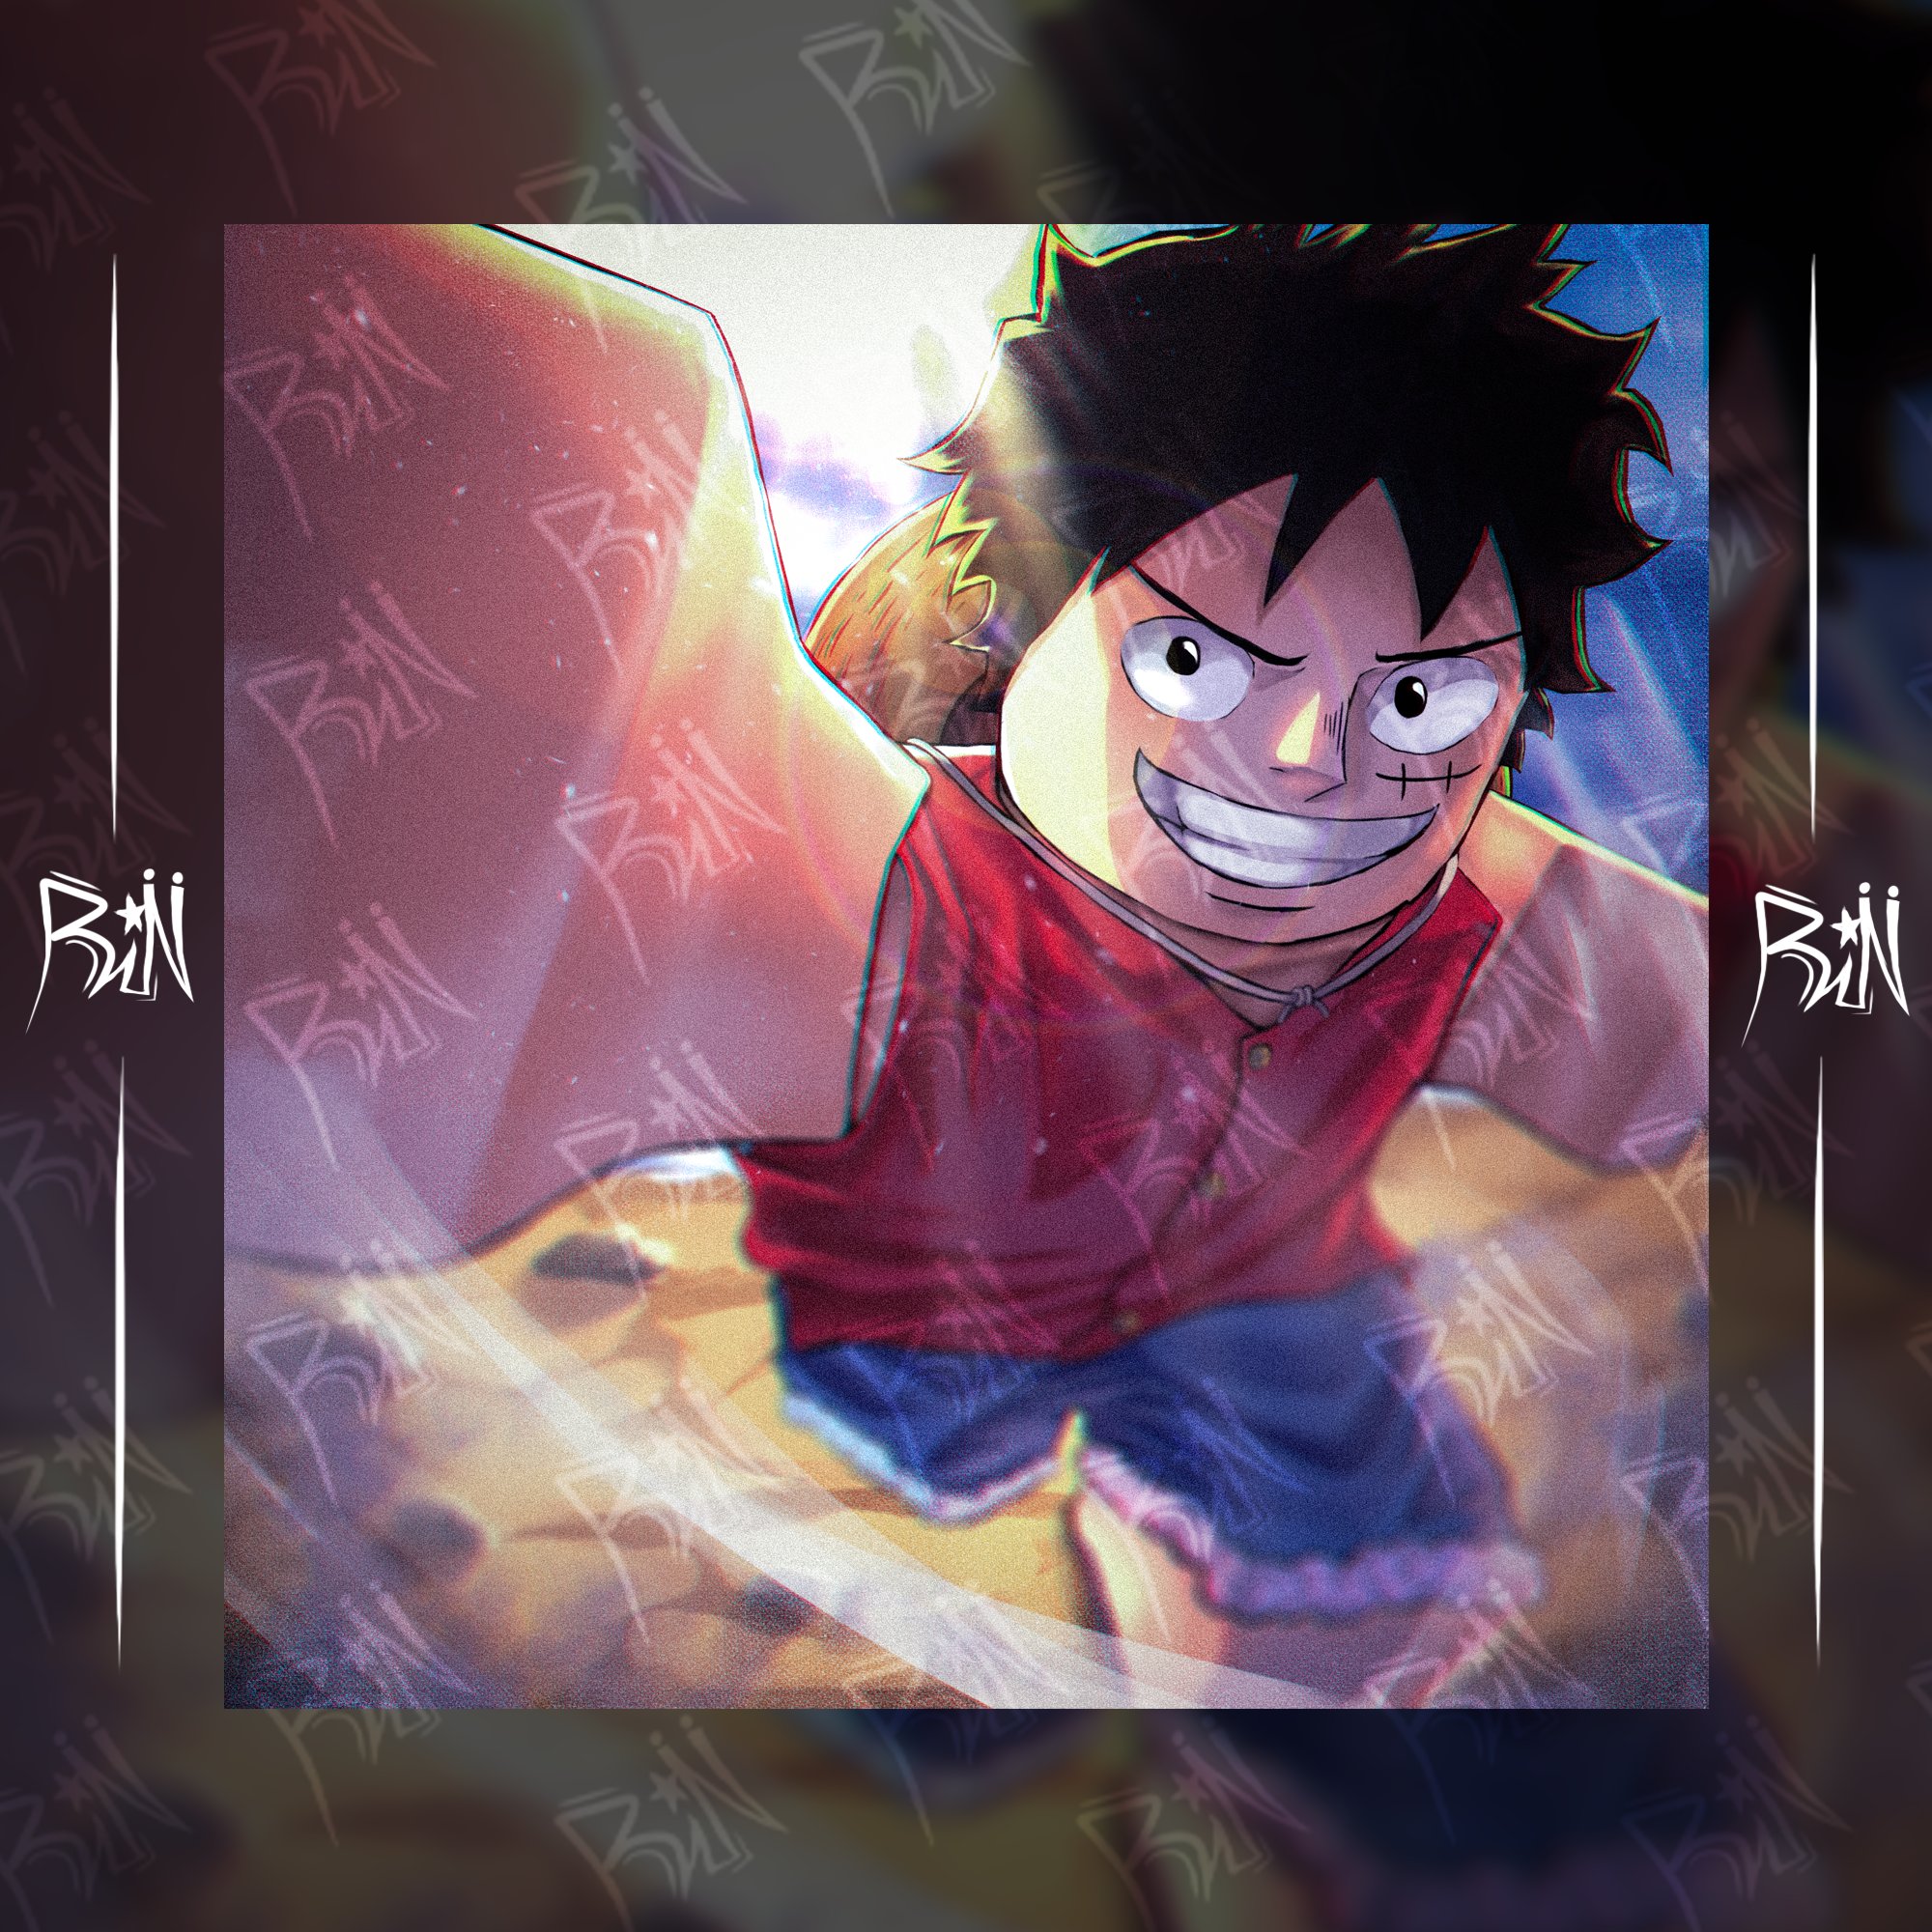 Okeoki on X: Luffy- - Commission form iEdu｜PU#2932 (Discord) - See my Gfx  gallery at  - Likes and Retweets are appreciated!  ^_^ #RobloxGFXC #Roblox #robloxart #RobloxDev #robloxGFX   / X